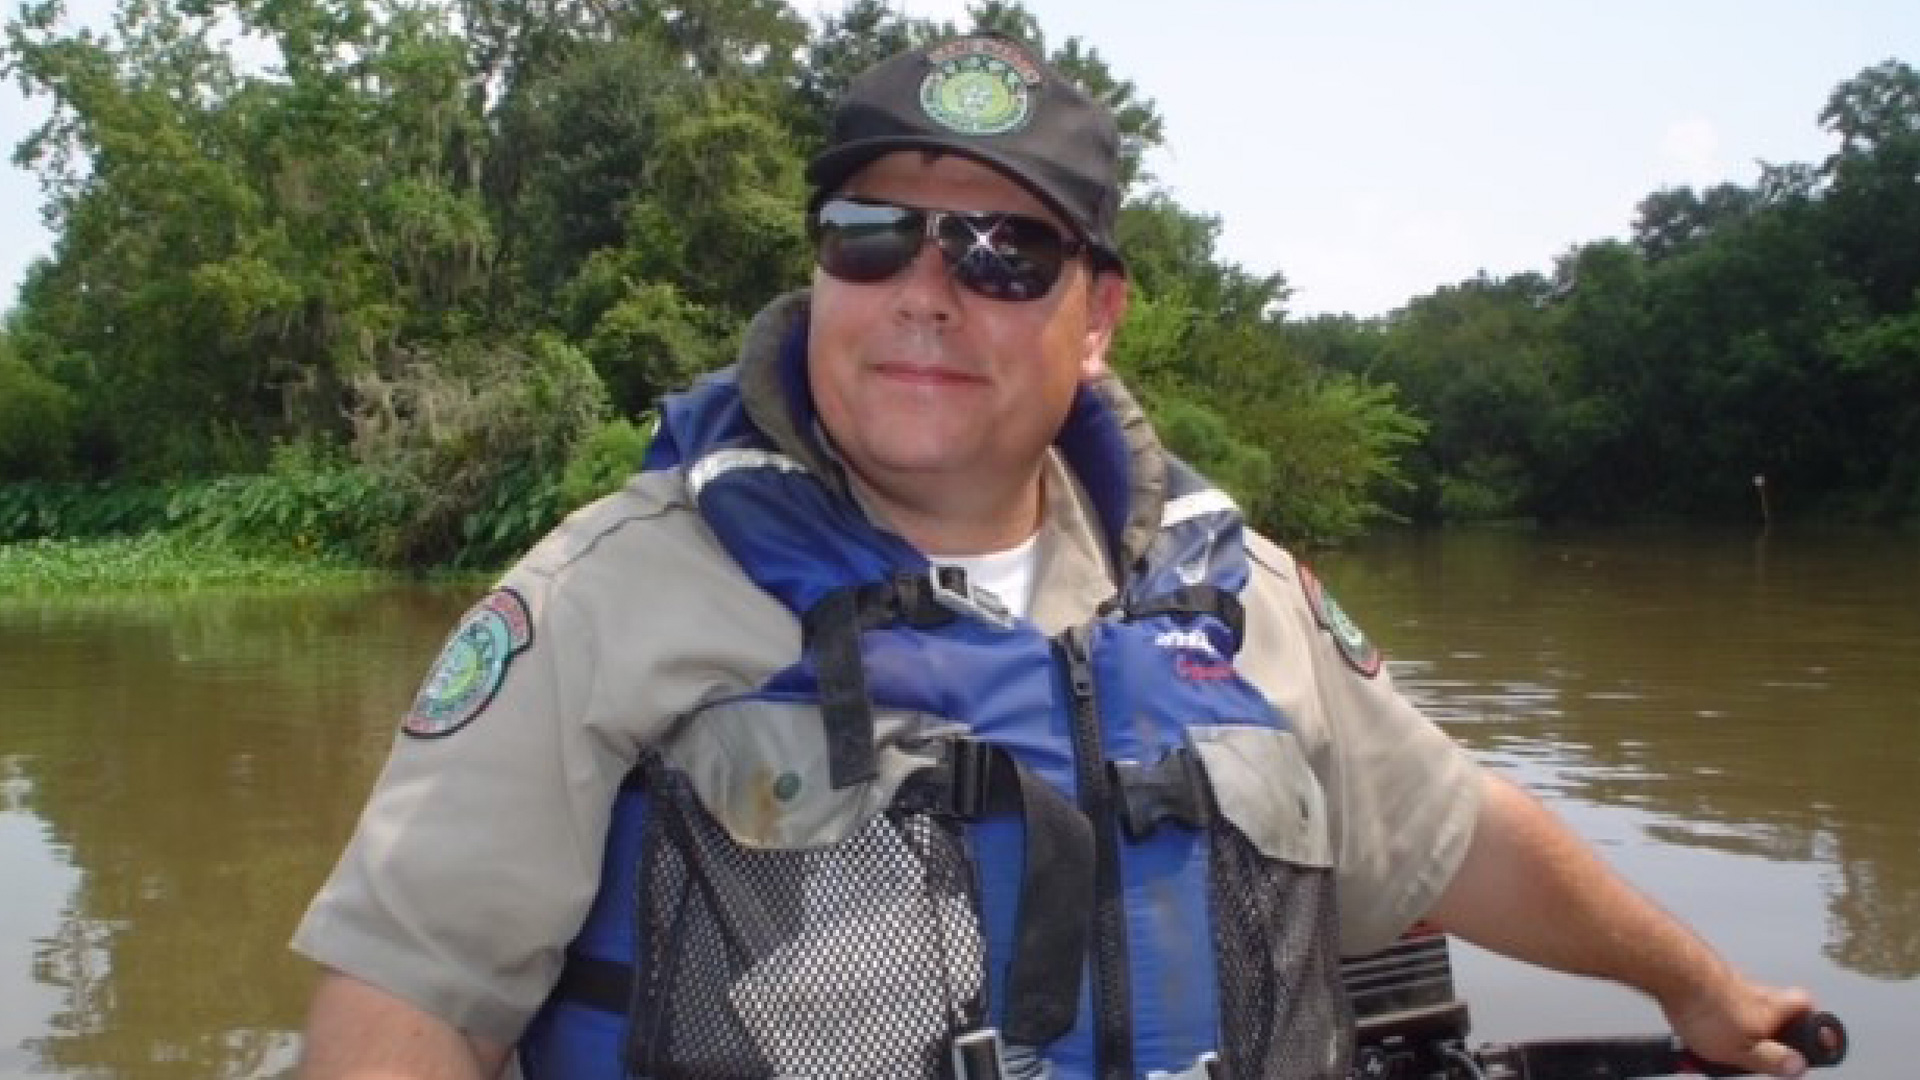 5 Things To Do When Being Checked by a Game Warden